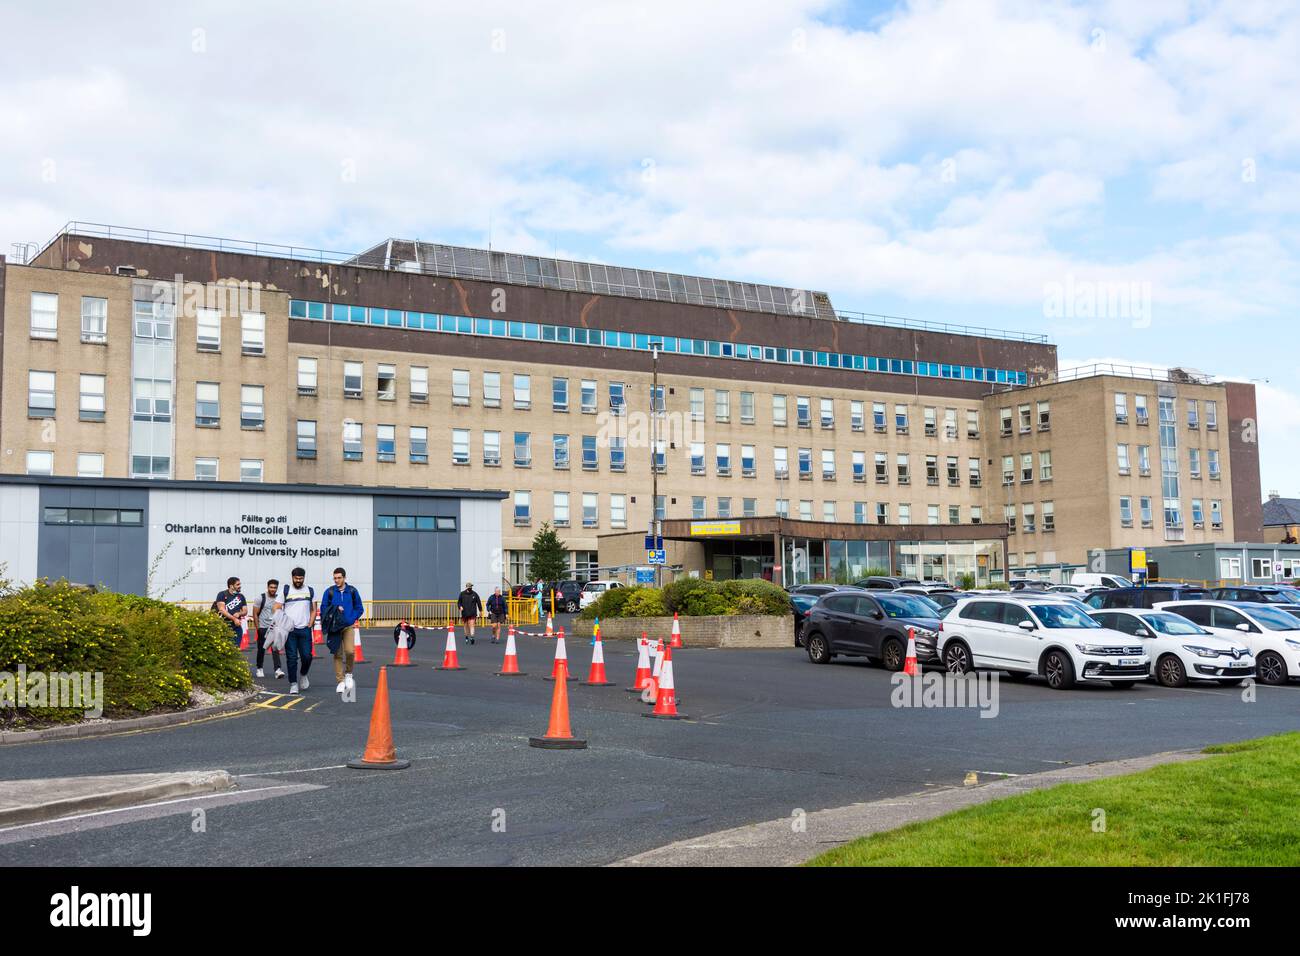 Frontage exterior of Letterkenny University Hospital (LUH) an acute general and maternity Hospital, County Donegal, Ireland Stock Photo